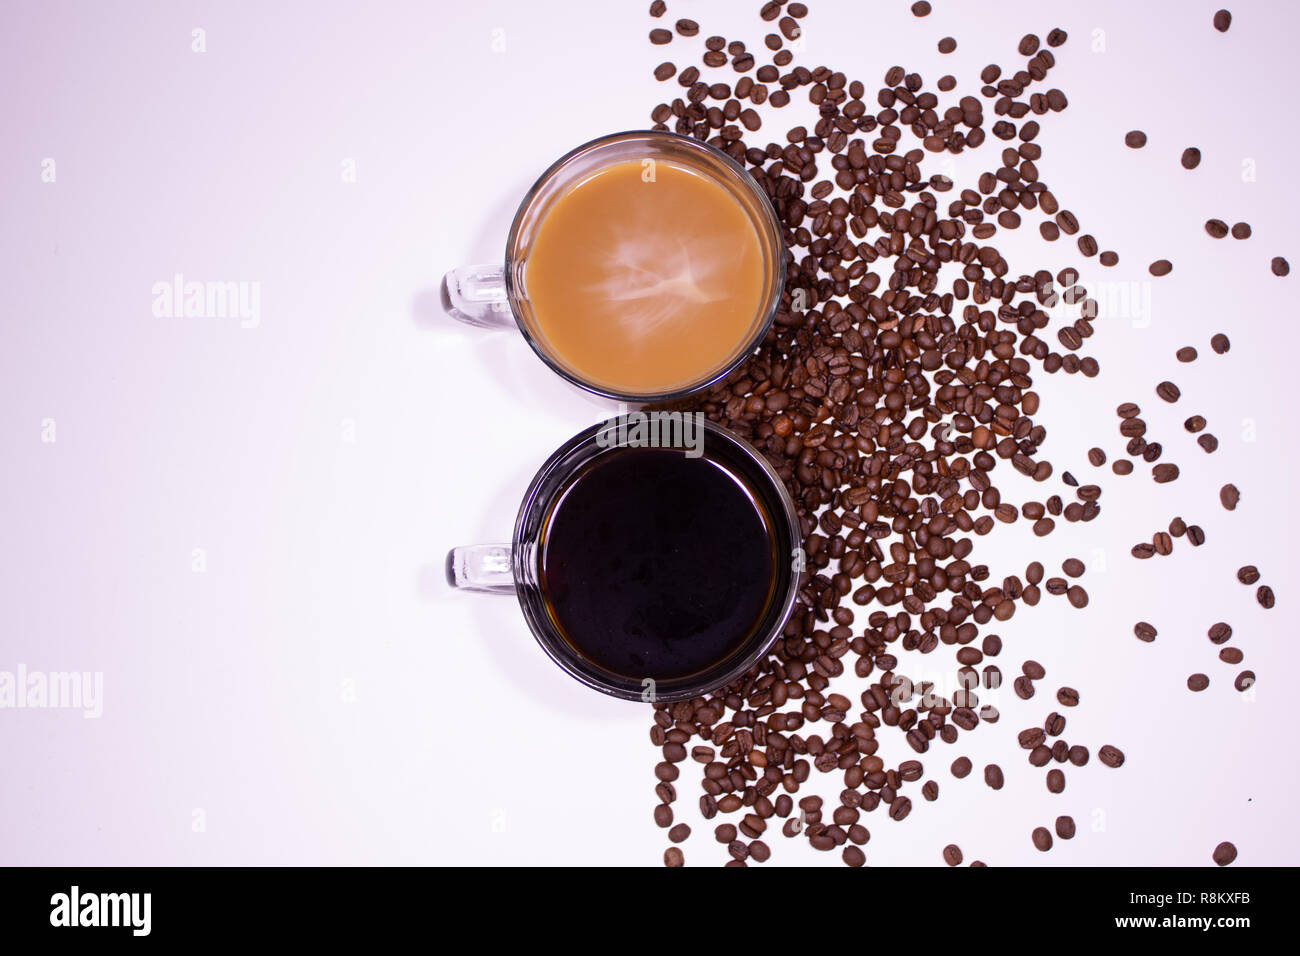 Two glass coffee mugs with coffee and cream on white table with coffee beans Stock Photo